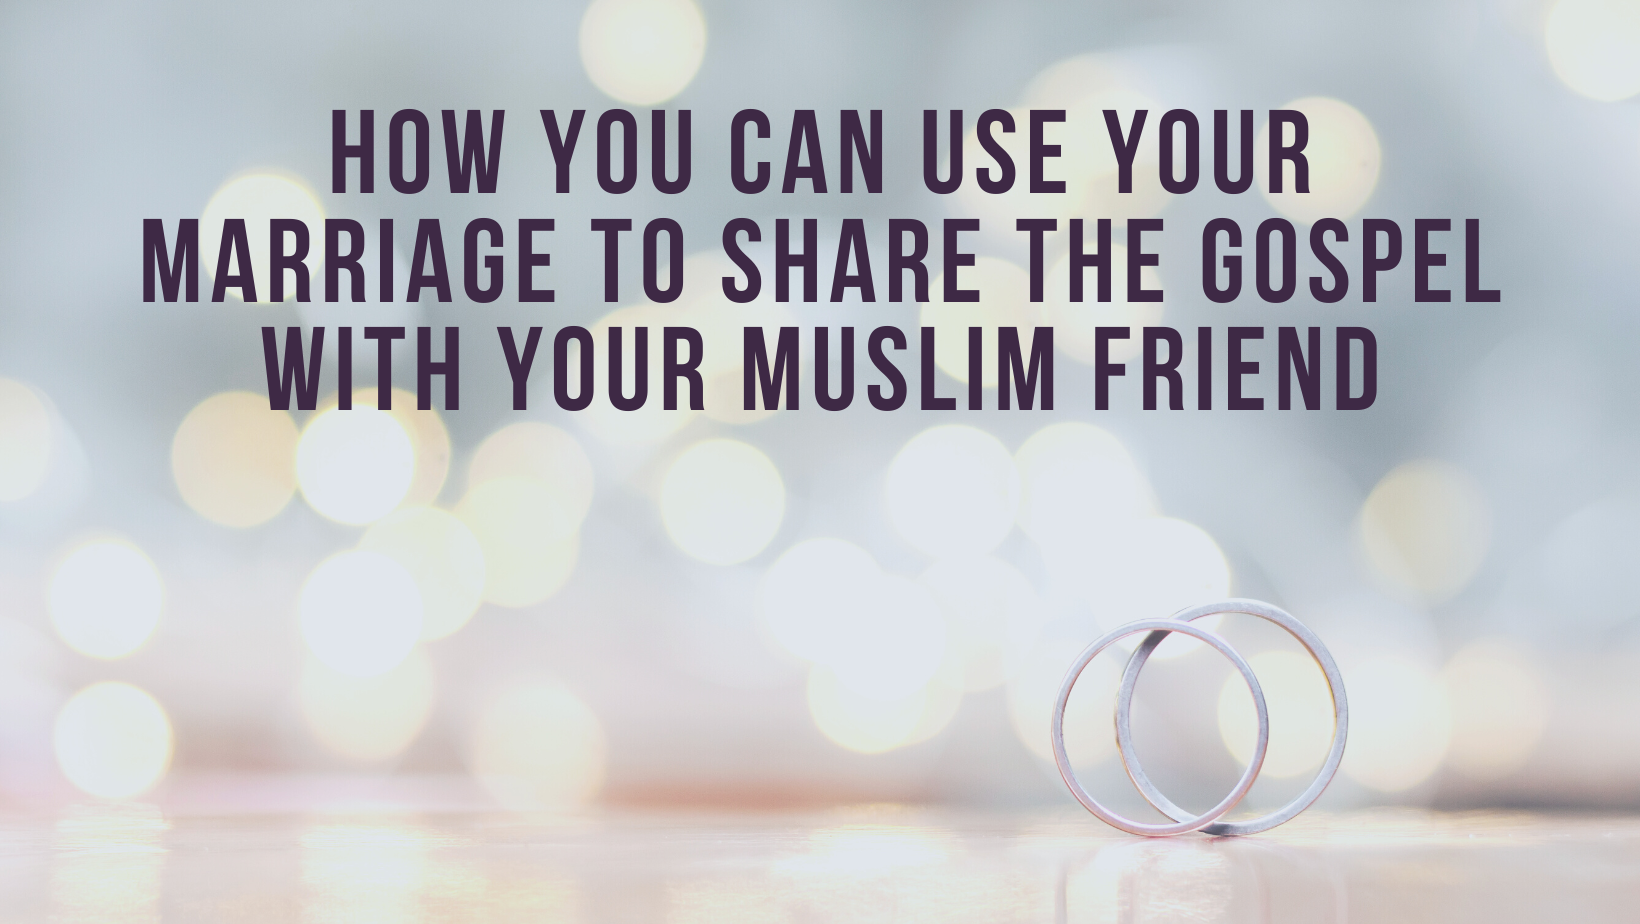 How you can use your marriage to share the gospel with your Muslim friend